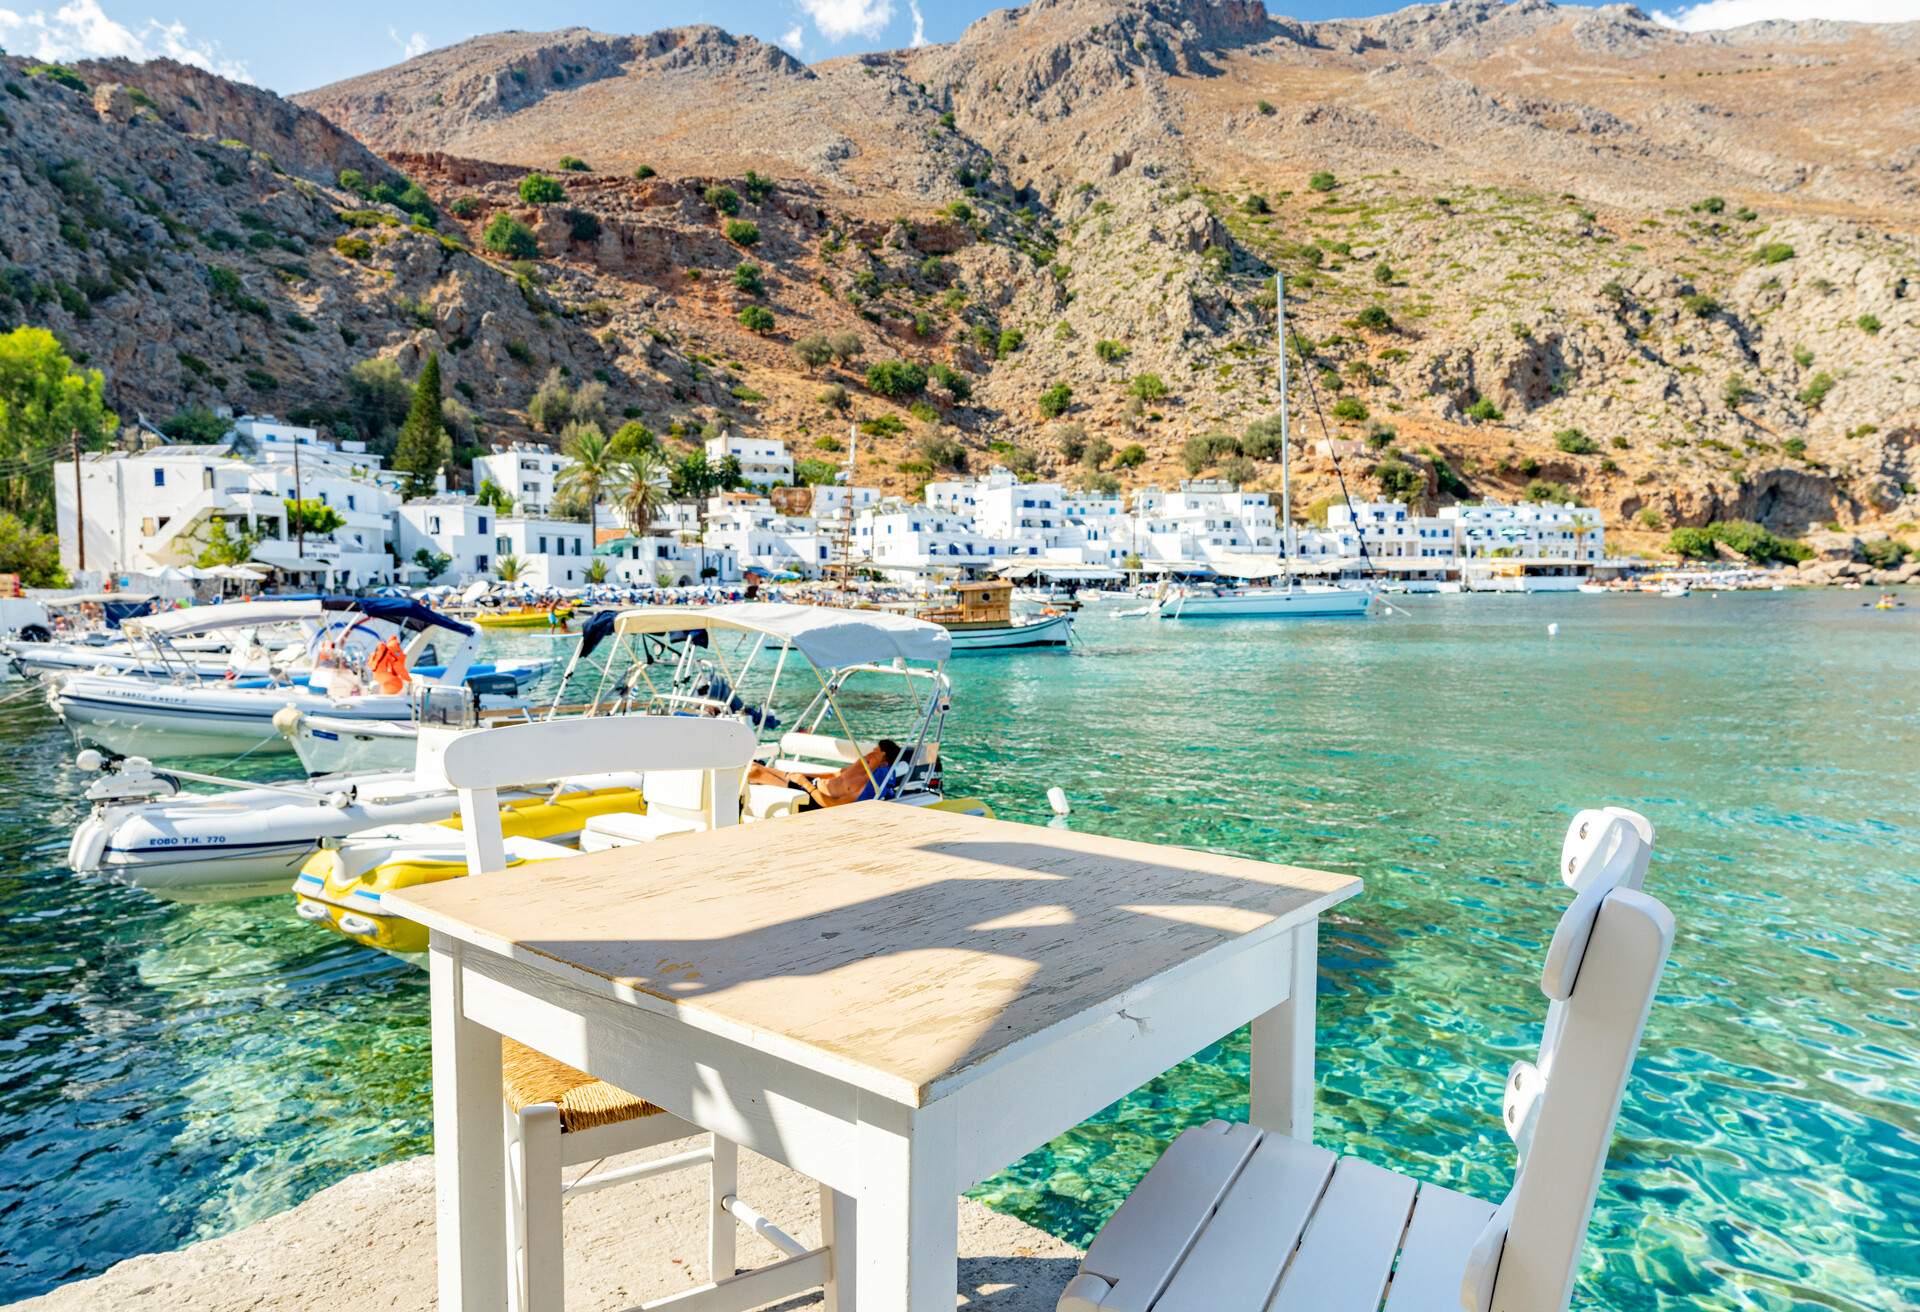 A white table paired with two chairs alongside the docked boats on a tidy harbour in a white-washed village at the foot of the mountain.